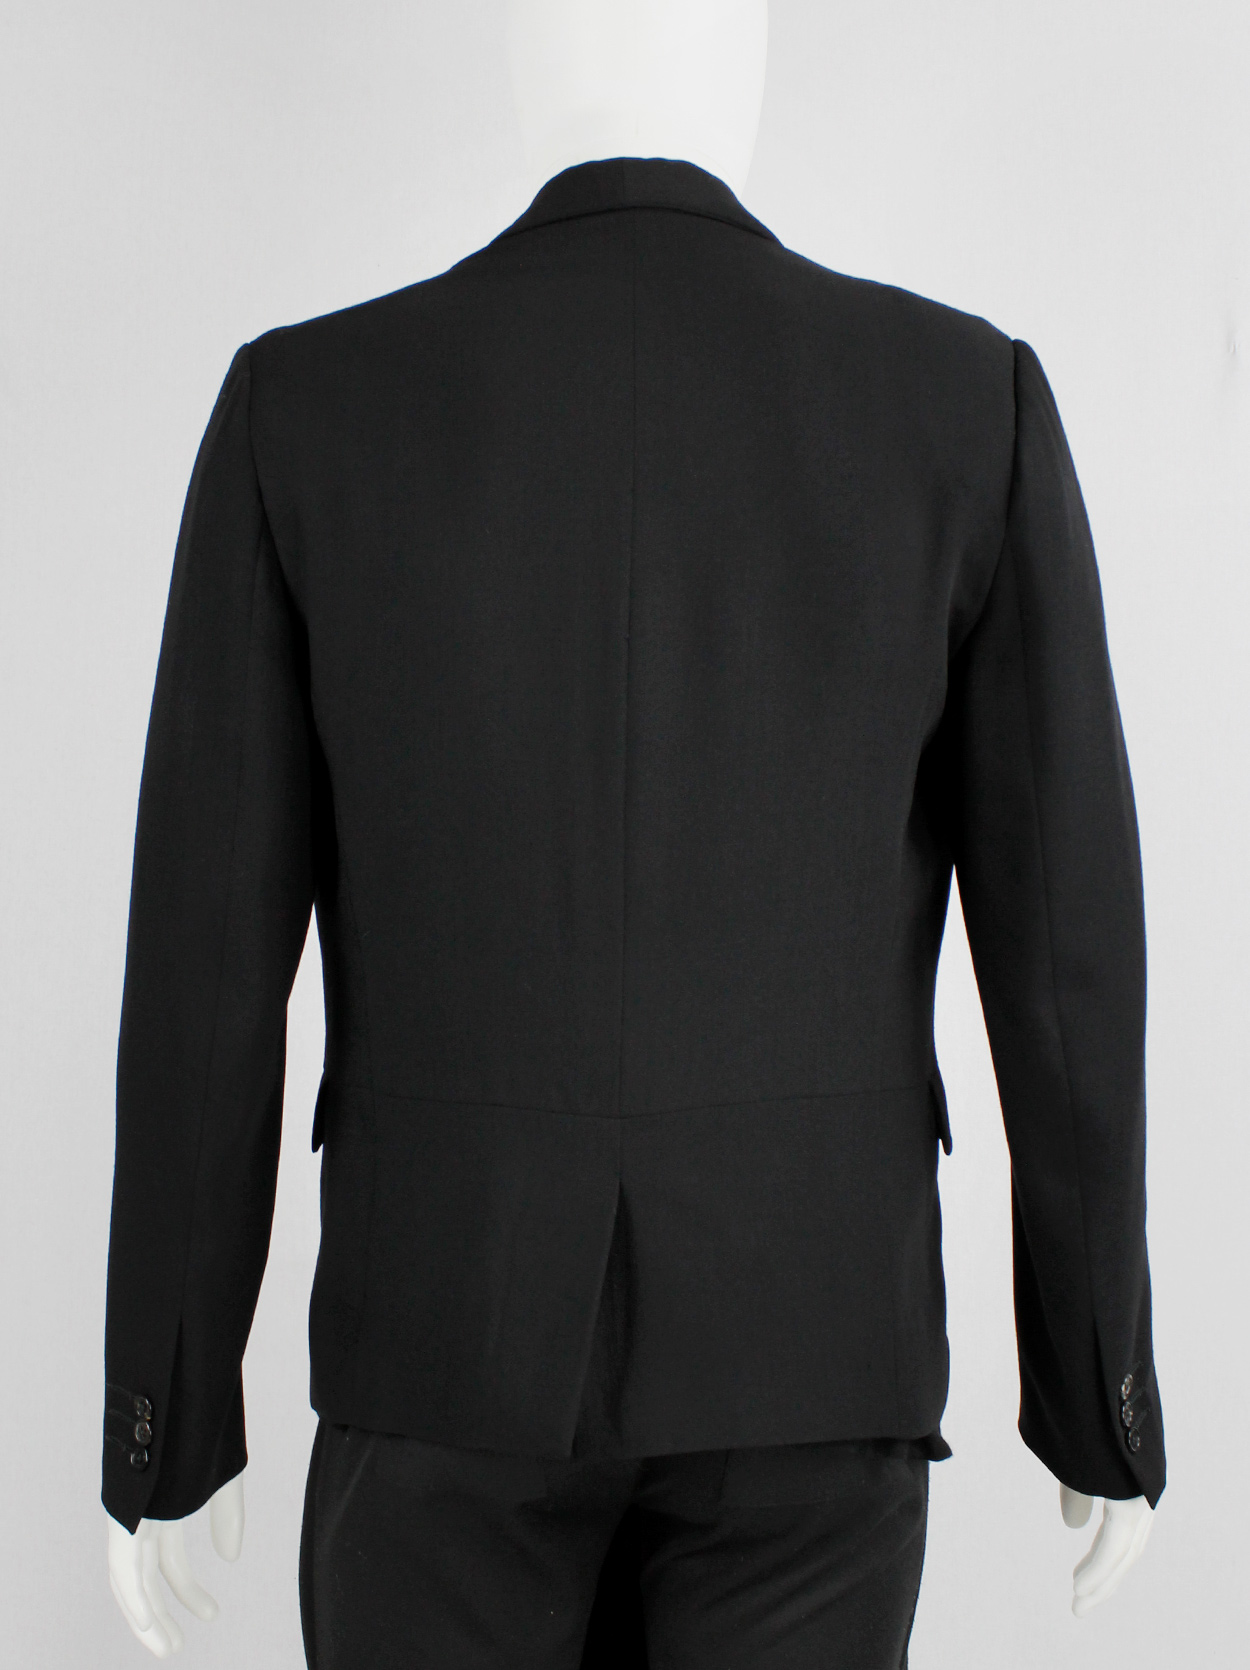 Ann Demeulemeester black blazer with front slit and draped panels ...